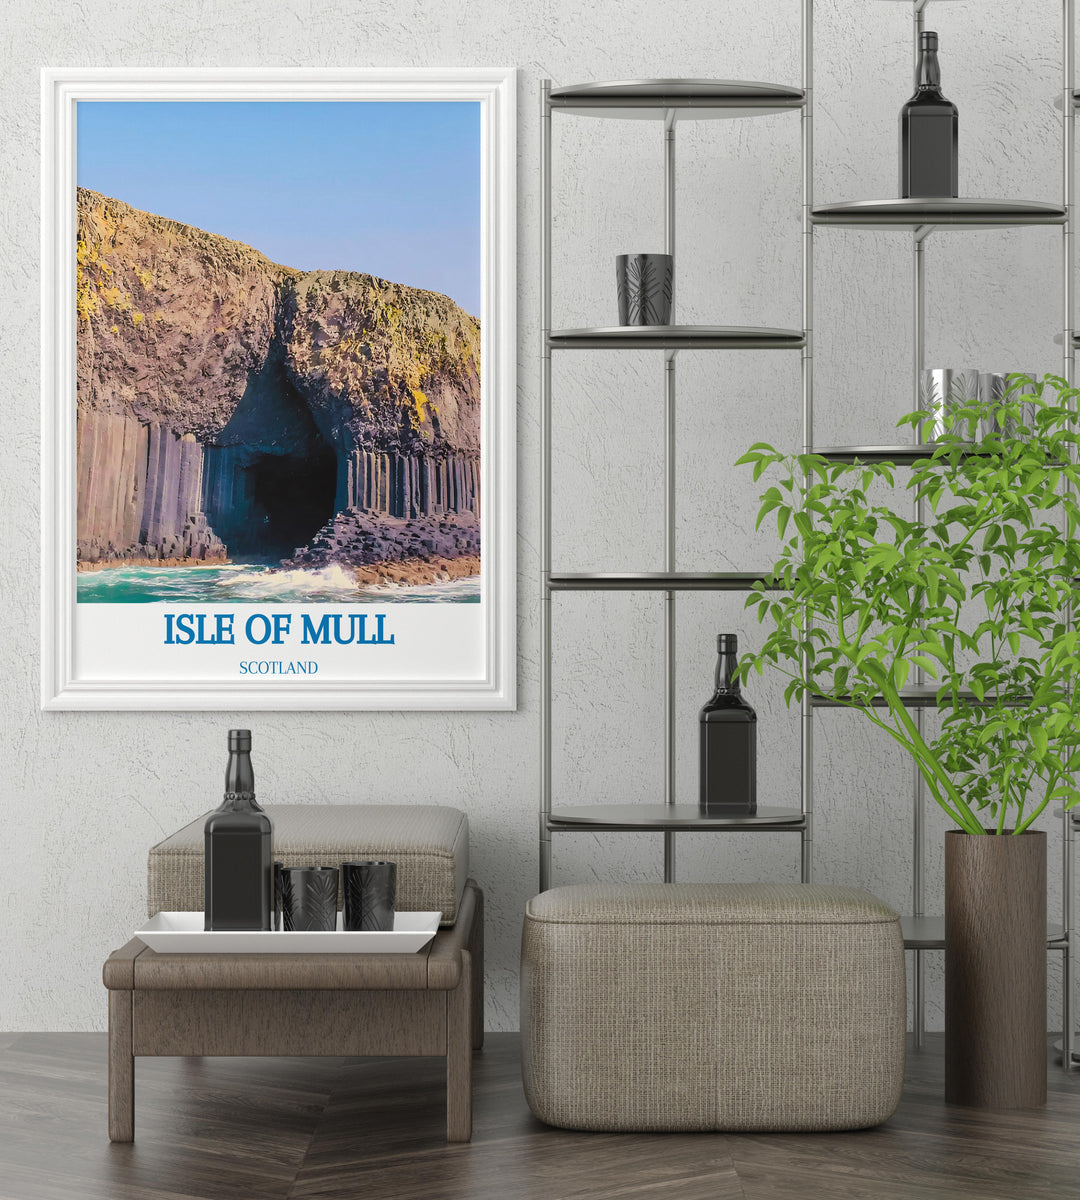 Canvas art of Fingals Cave emphasizing the caves unique geological structures and its historical significance in Scottish heritage